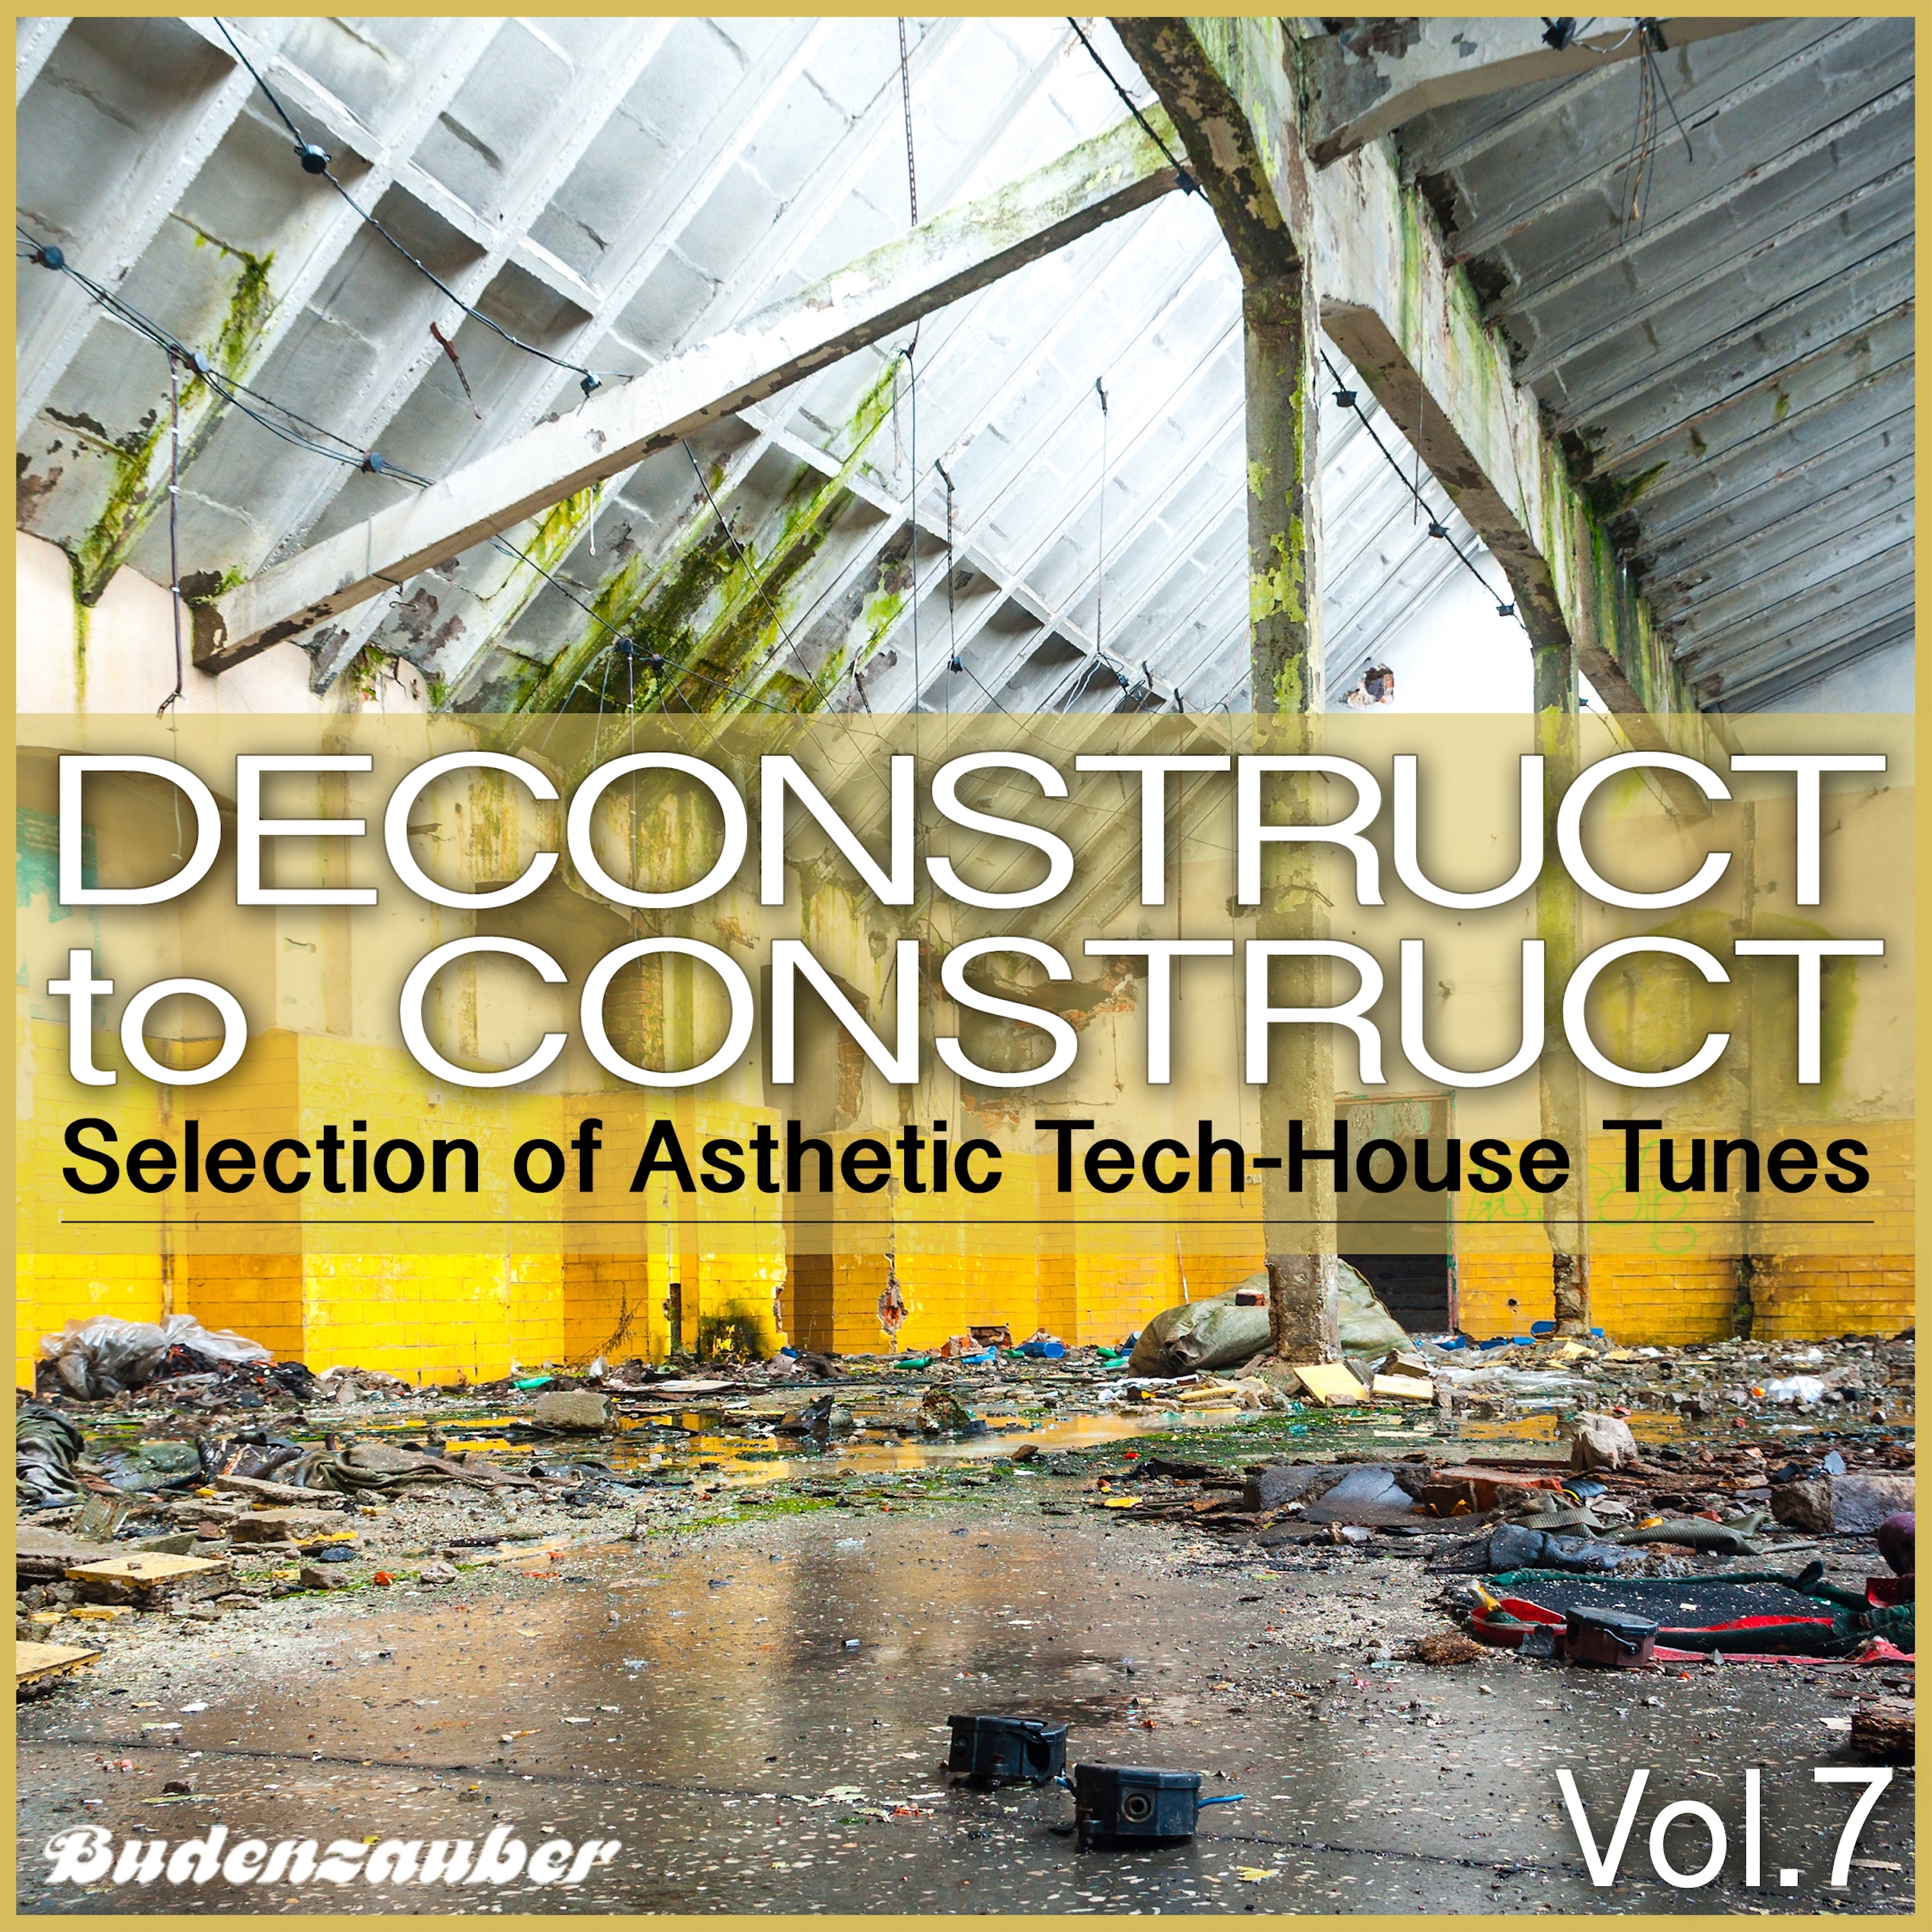 Deconstruct to Construct, Vol. 7 - Selection of Asthetic Tech-House Tunes